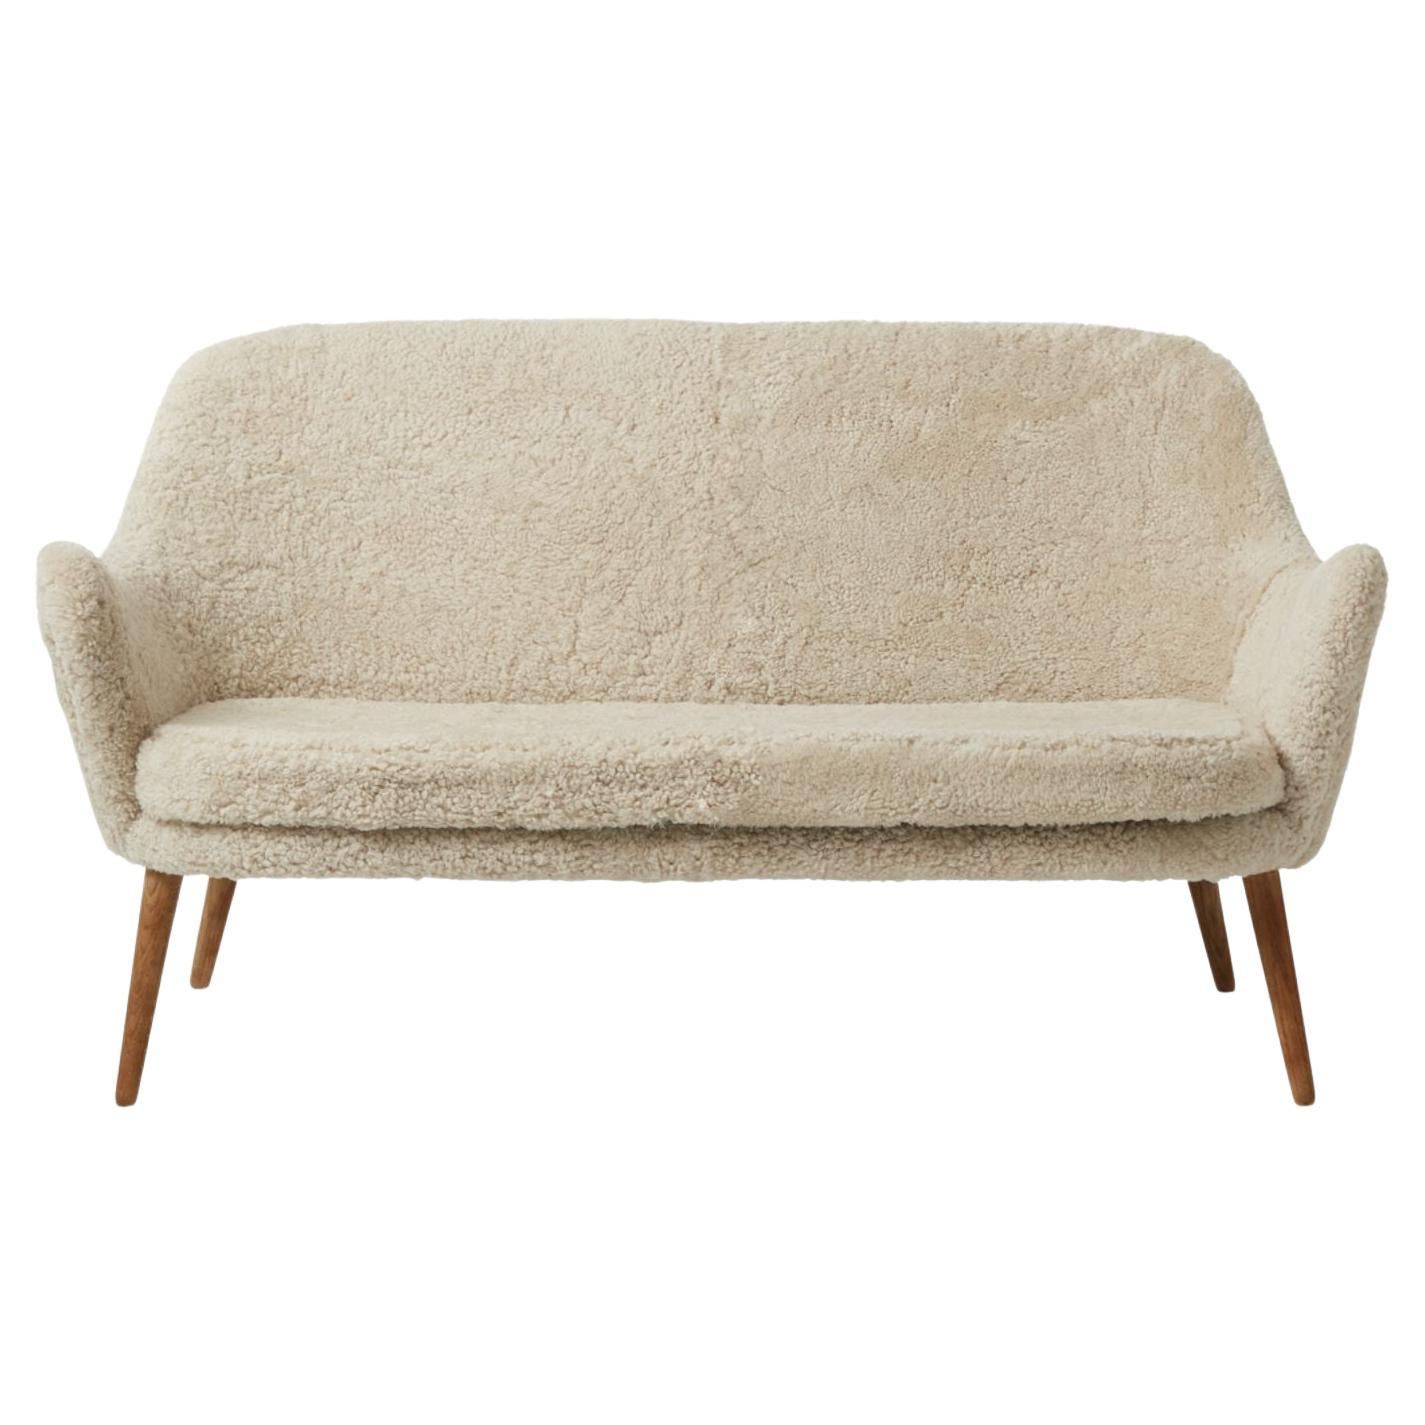 Dwell 2 Seater Sheepskin Moonlight by Warm Nordic For Sale